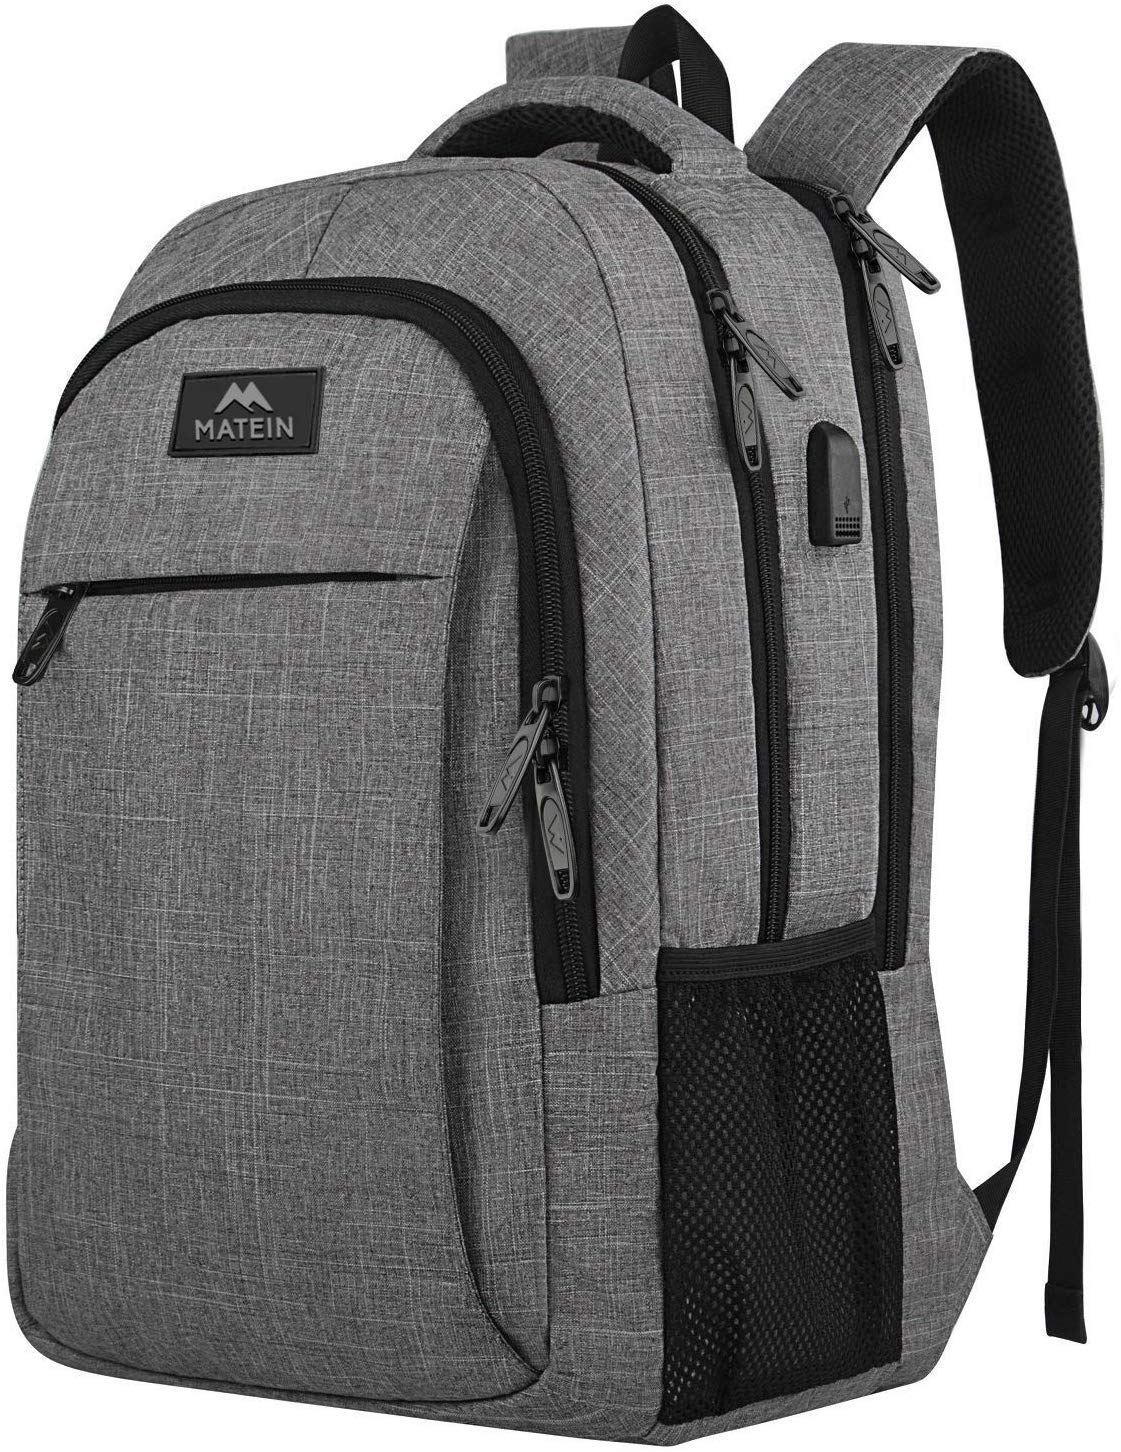 The MATEIN Laptop Backpack